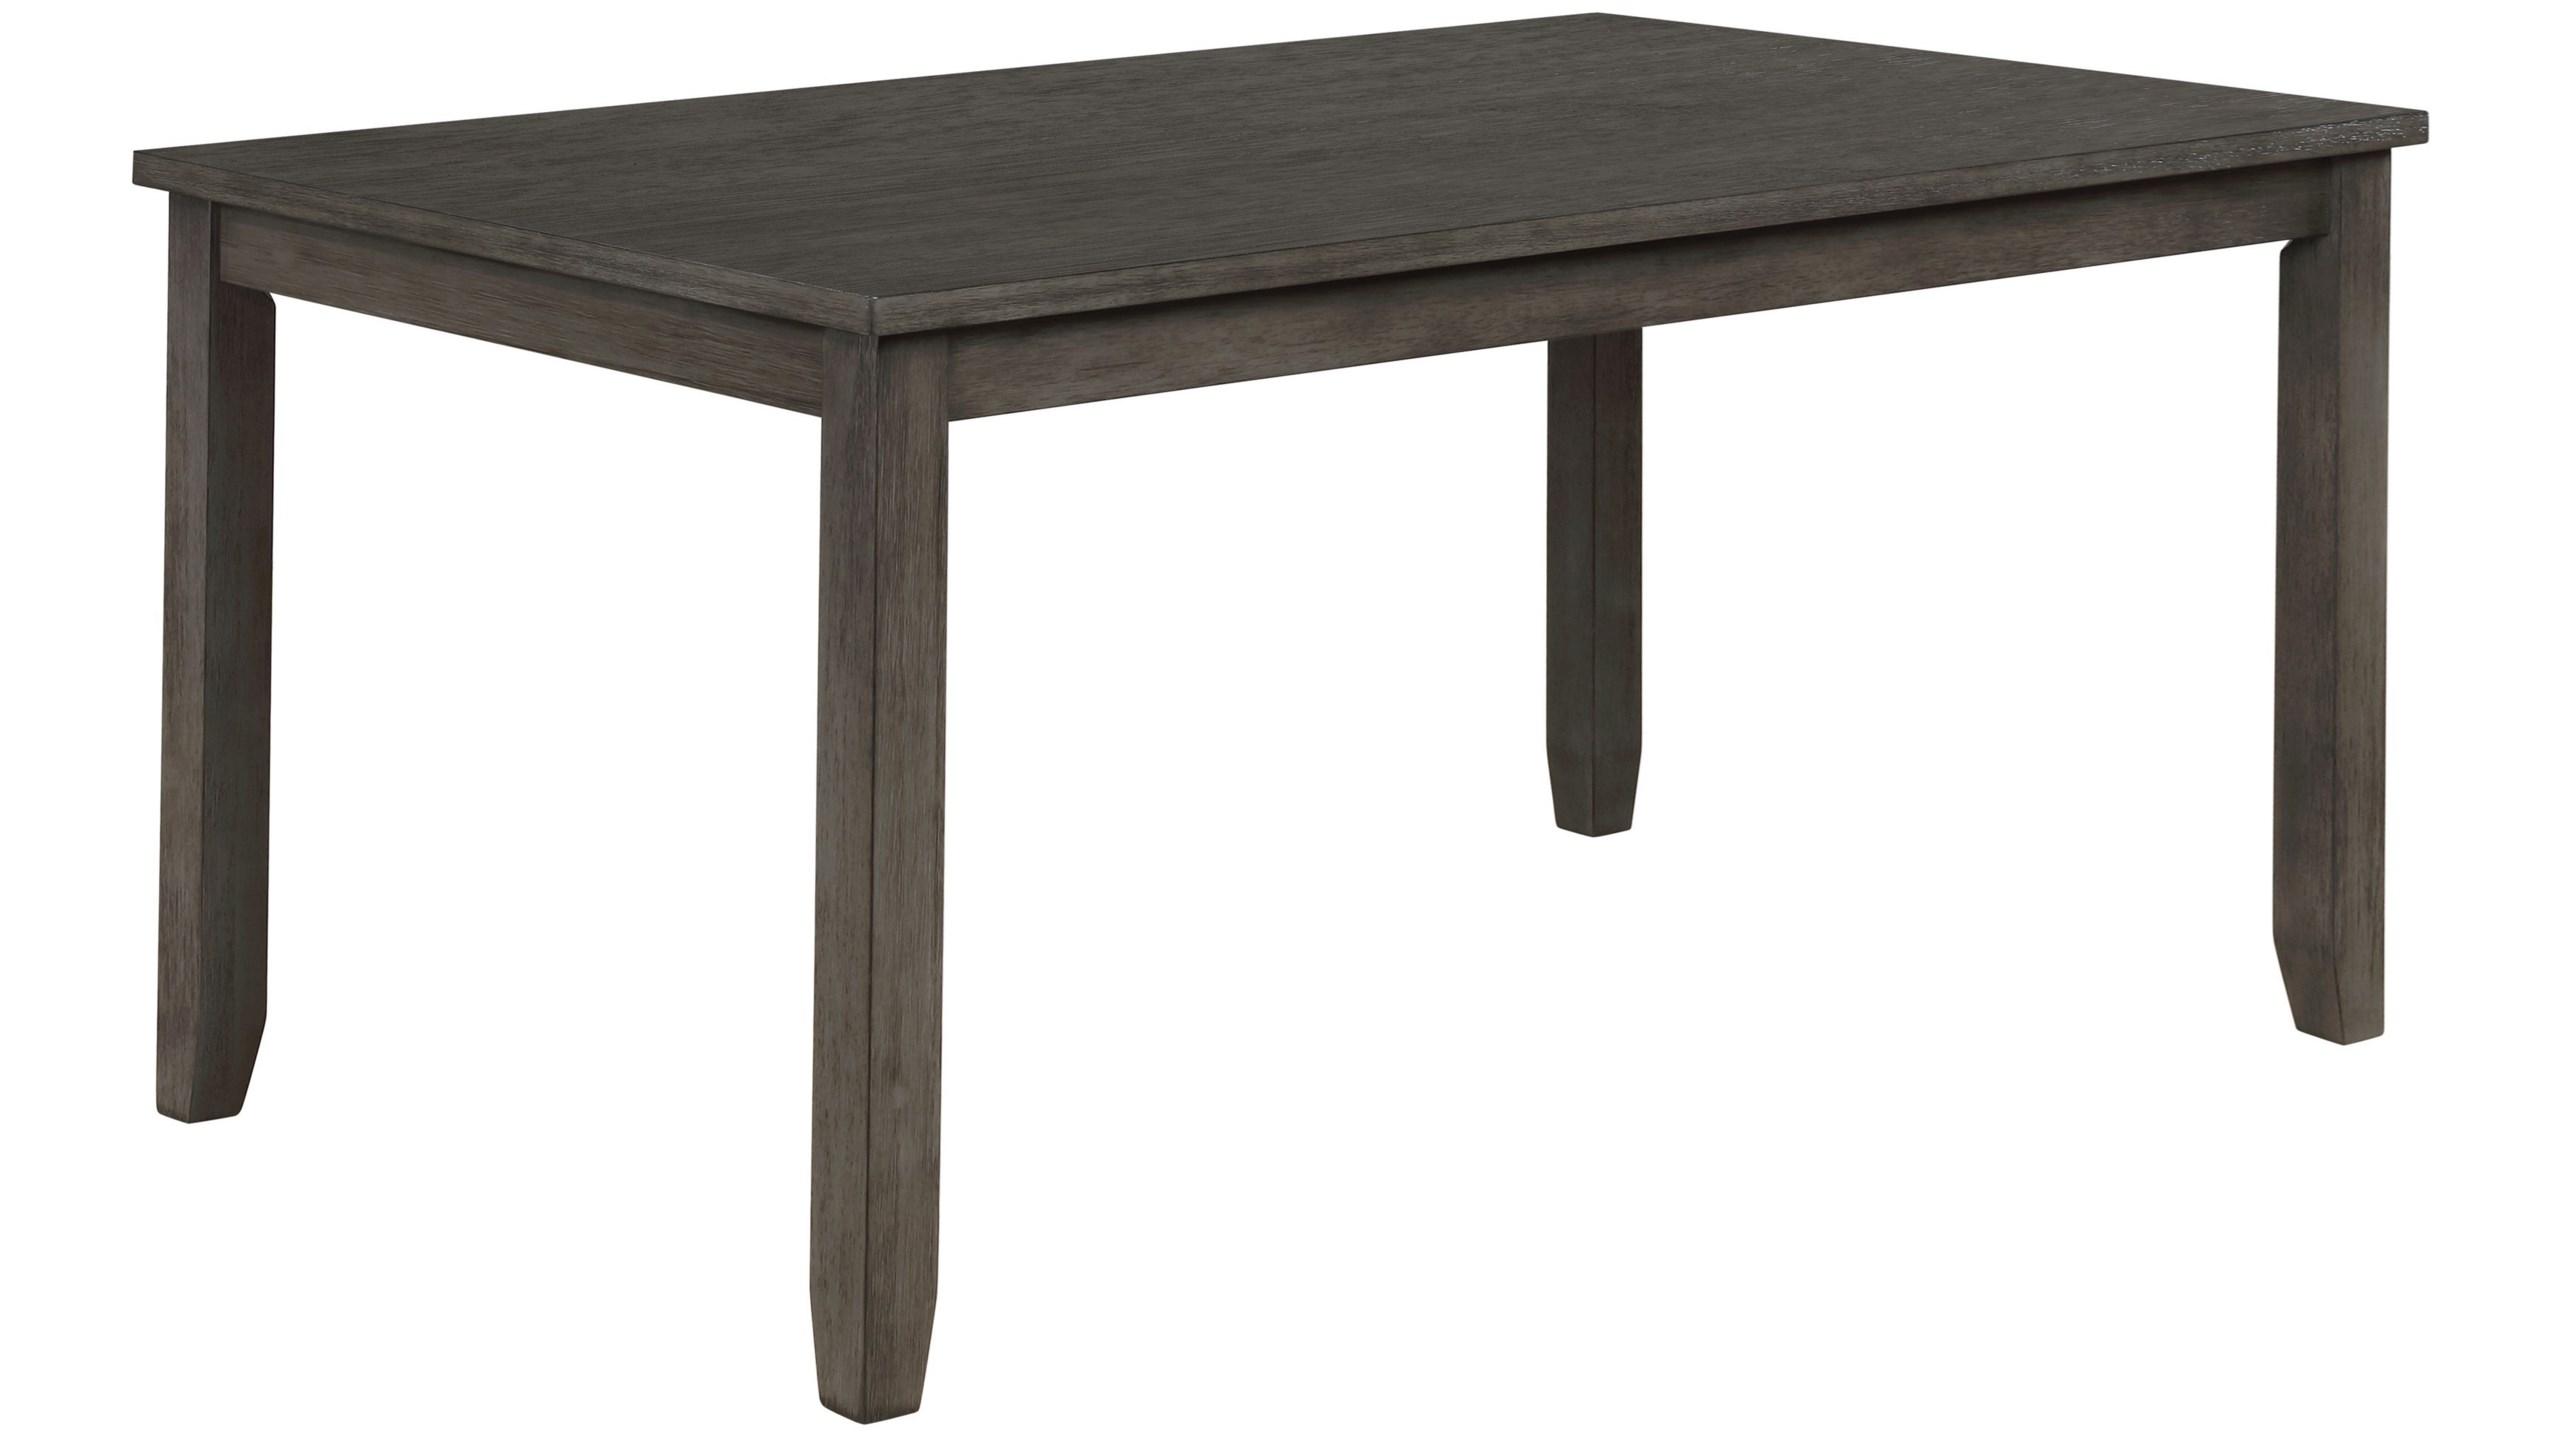 Simple, Farmhouse Dining Table Favella 2323DGY-T-3660 in Dark Gray 